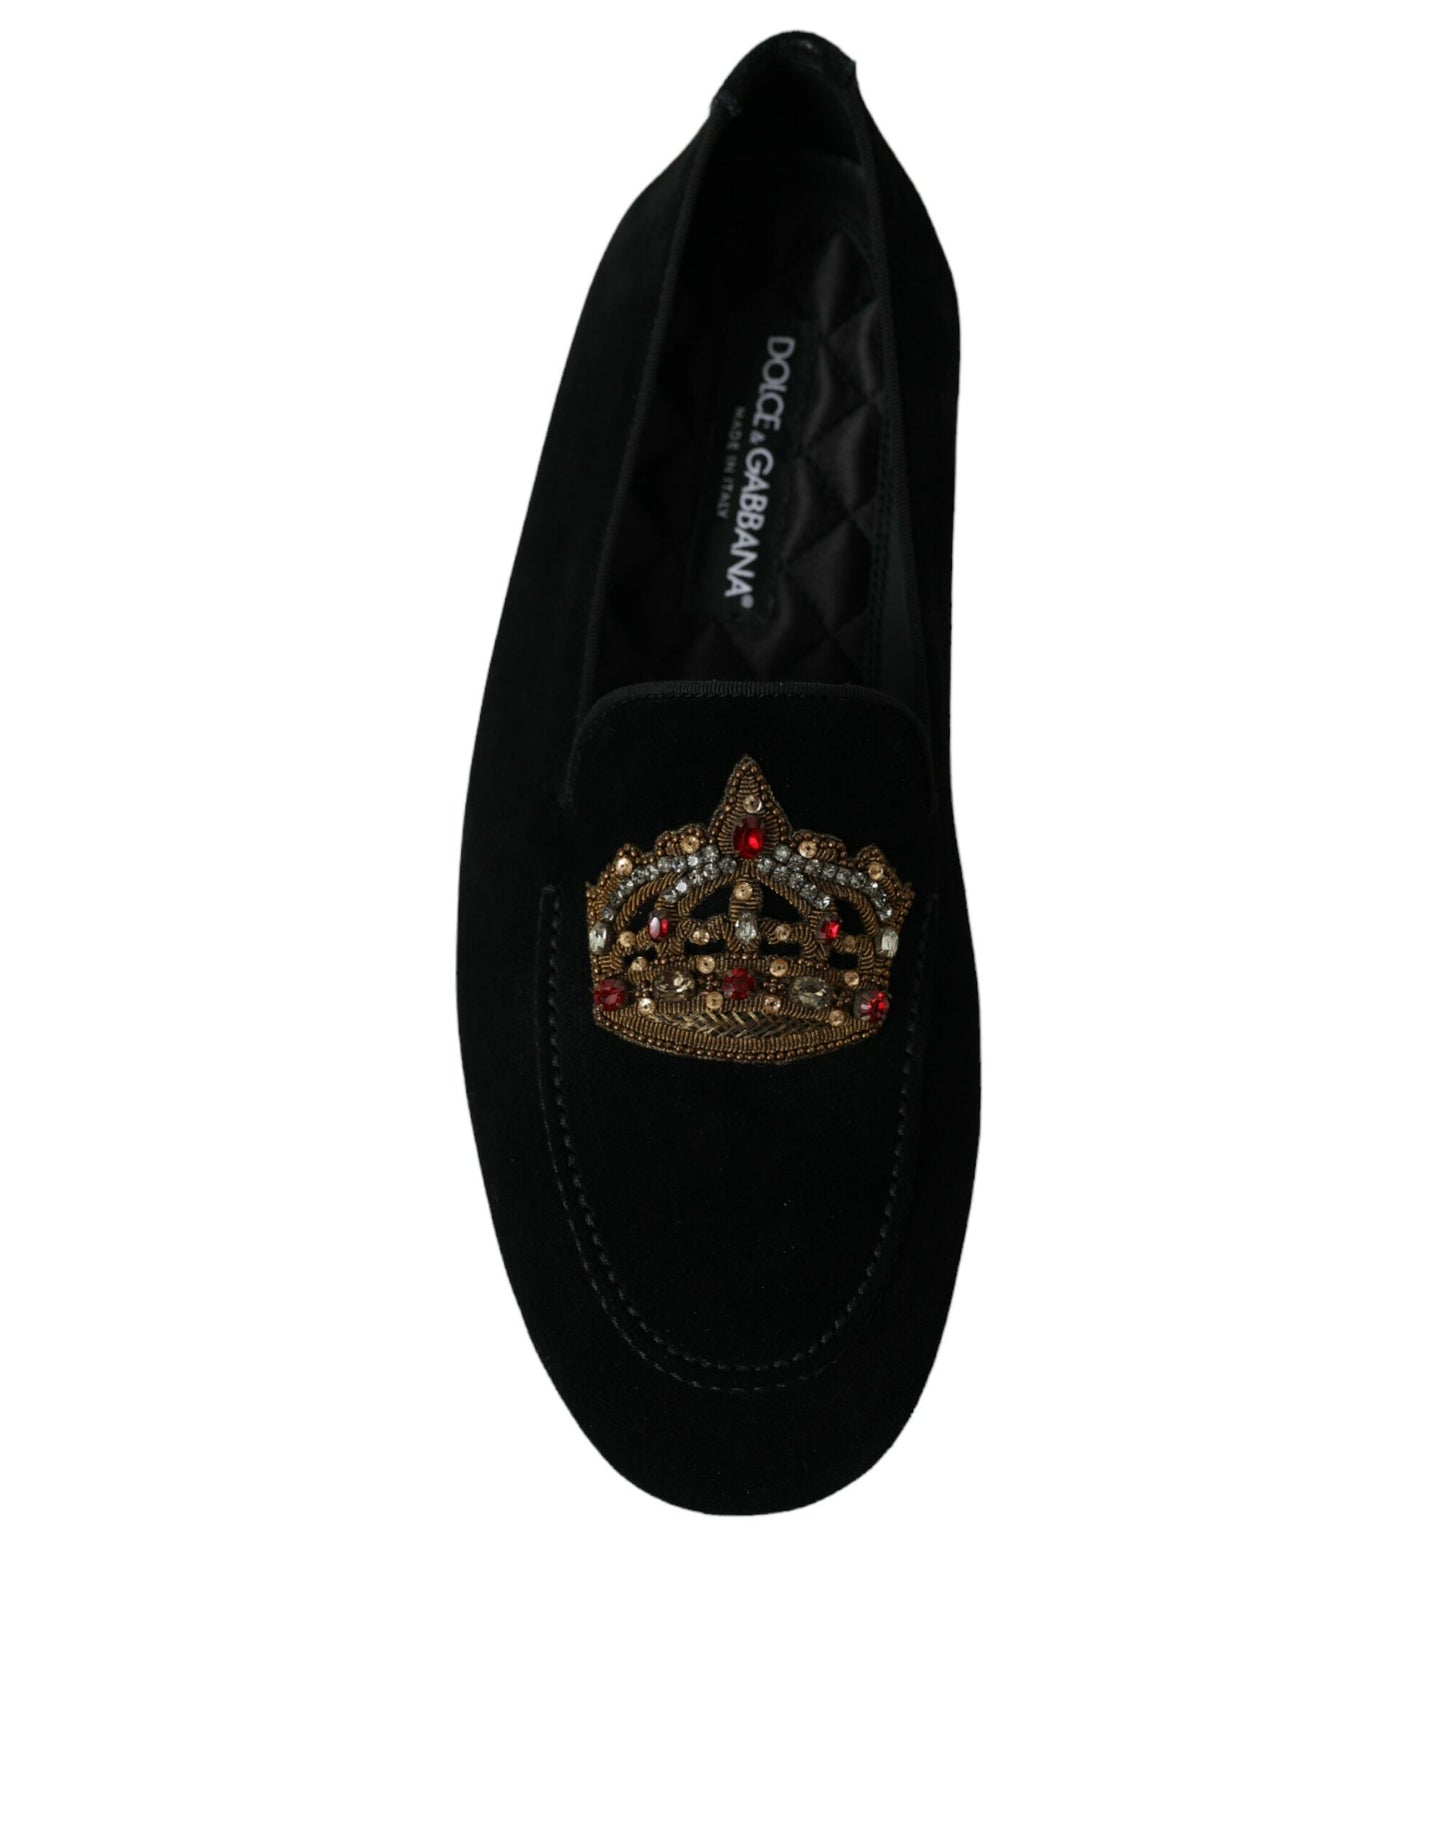 Dolce & Gabbana Black Leather Crystal Crown Loafers Shoes - DEA STILOSA MILANO